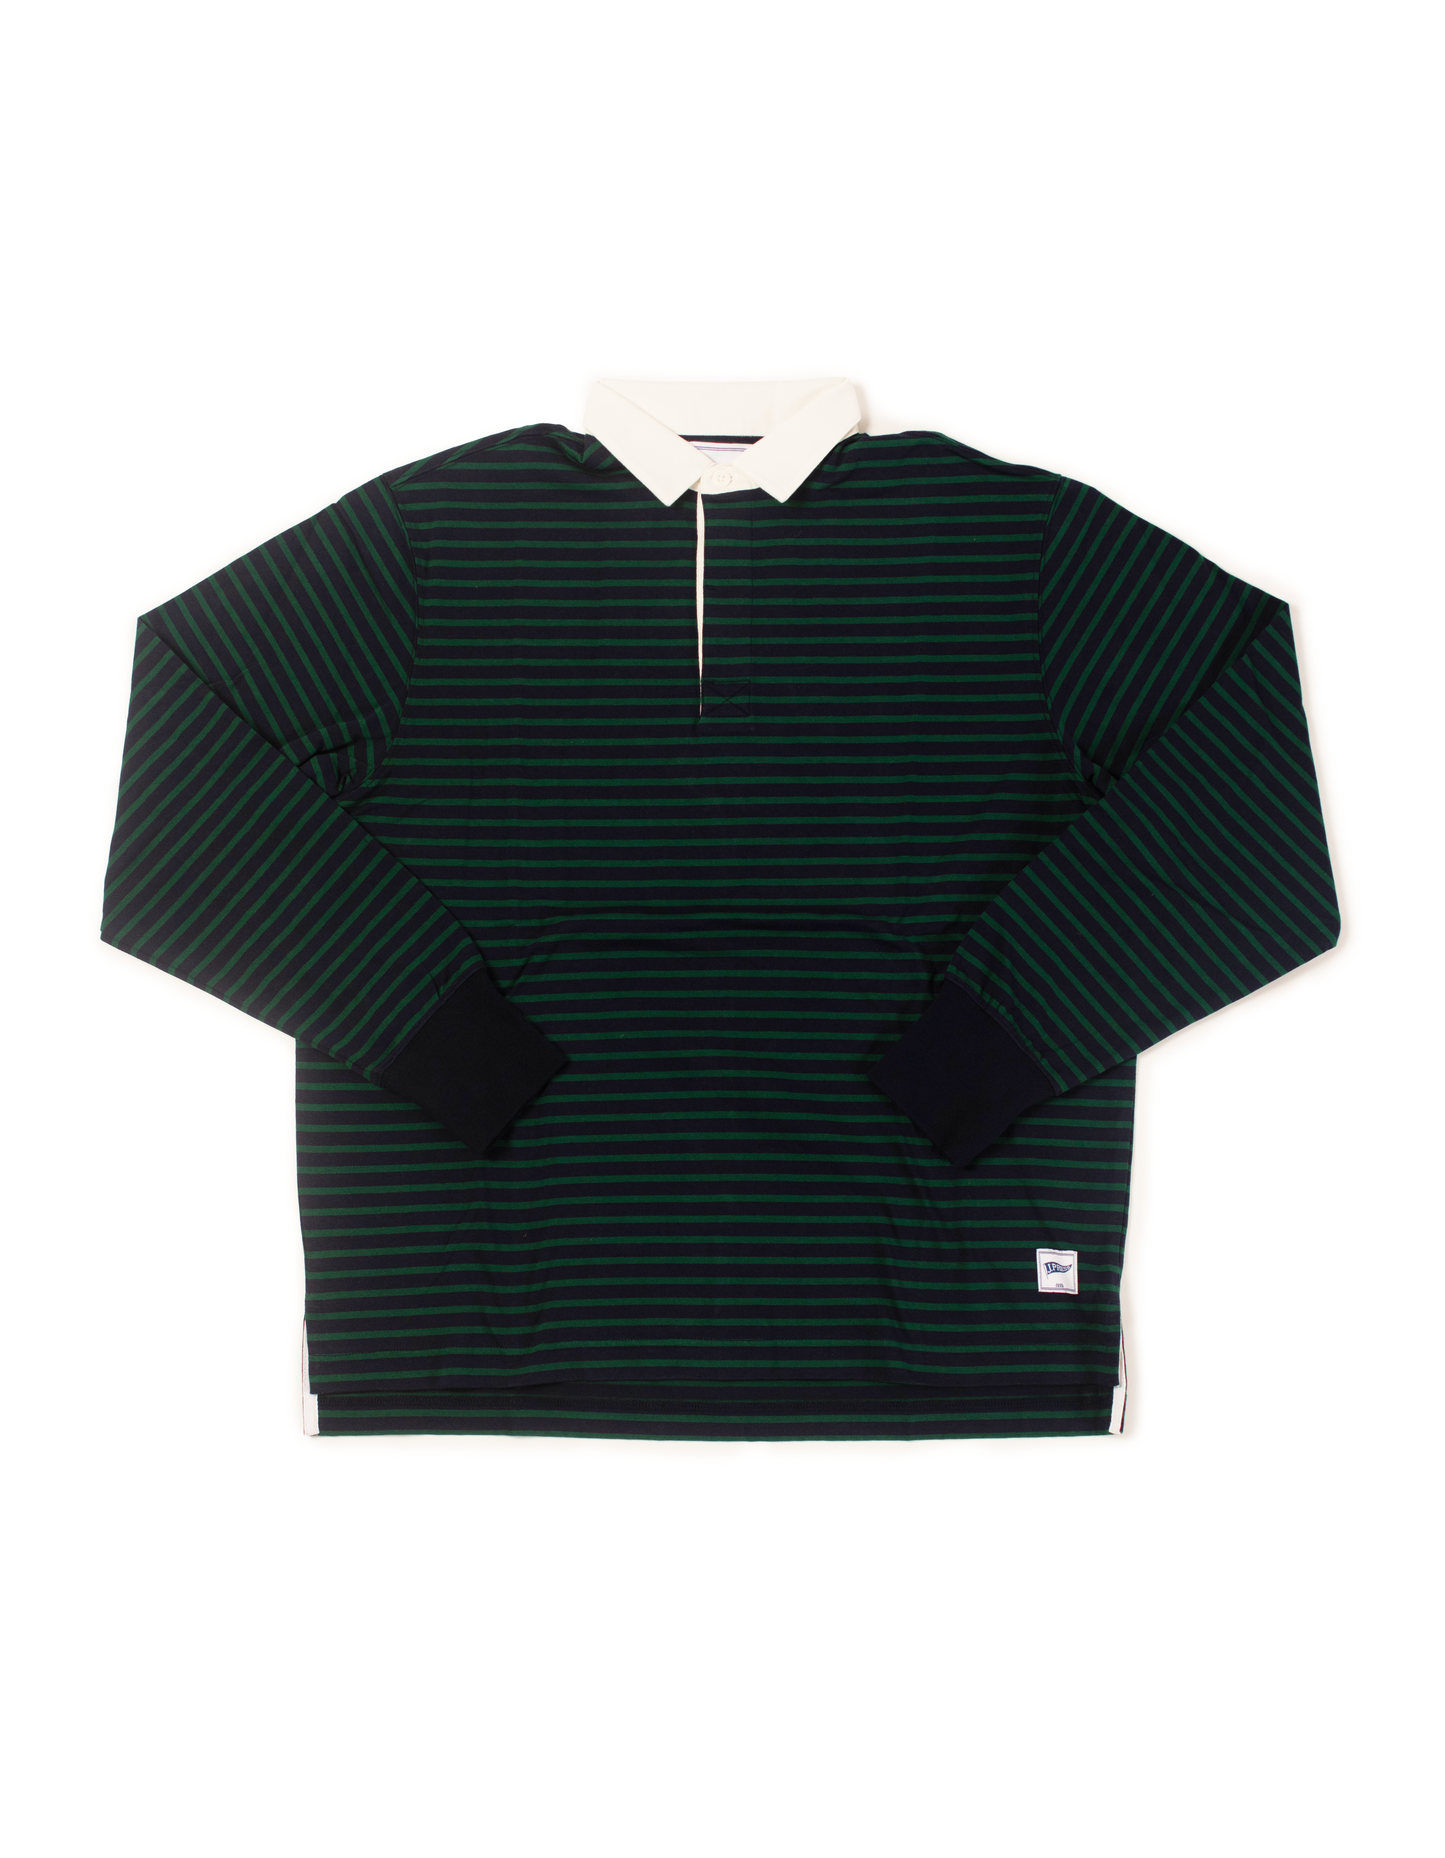 STRIPED RUGBY - GREEN/ NAVY